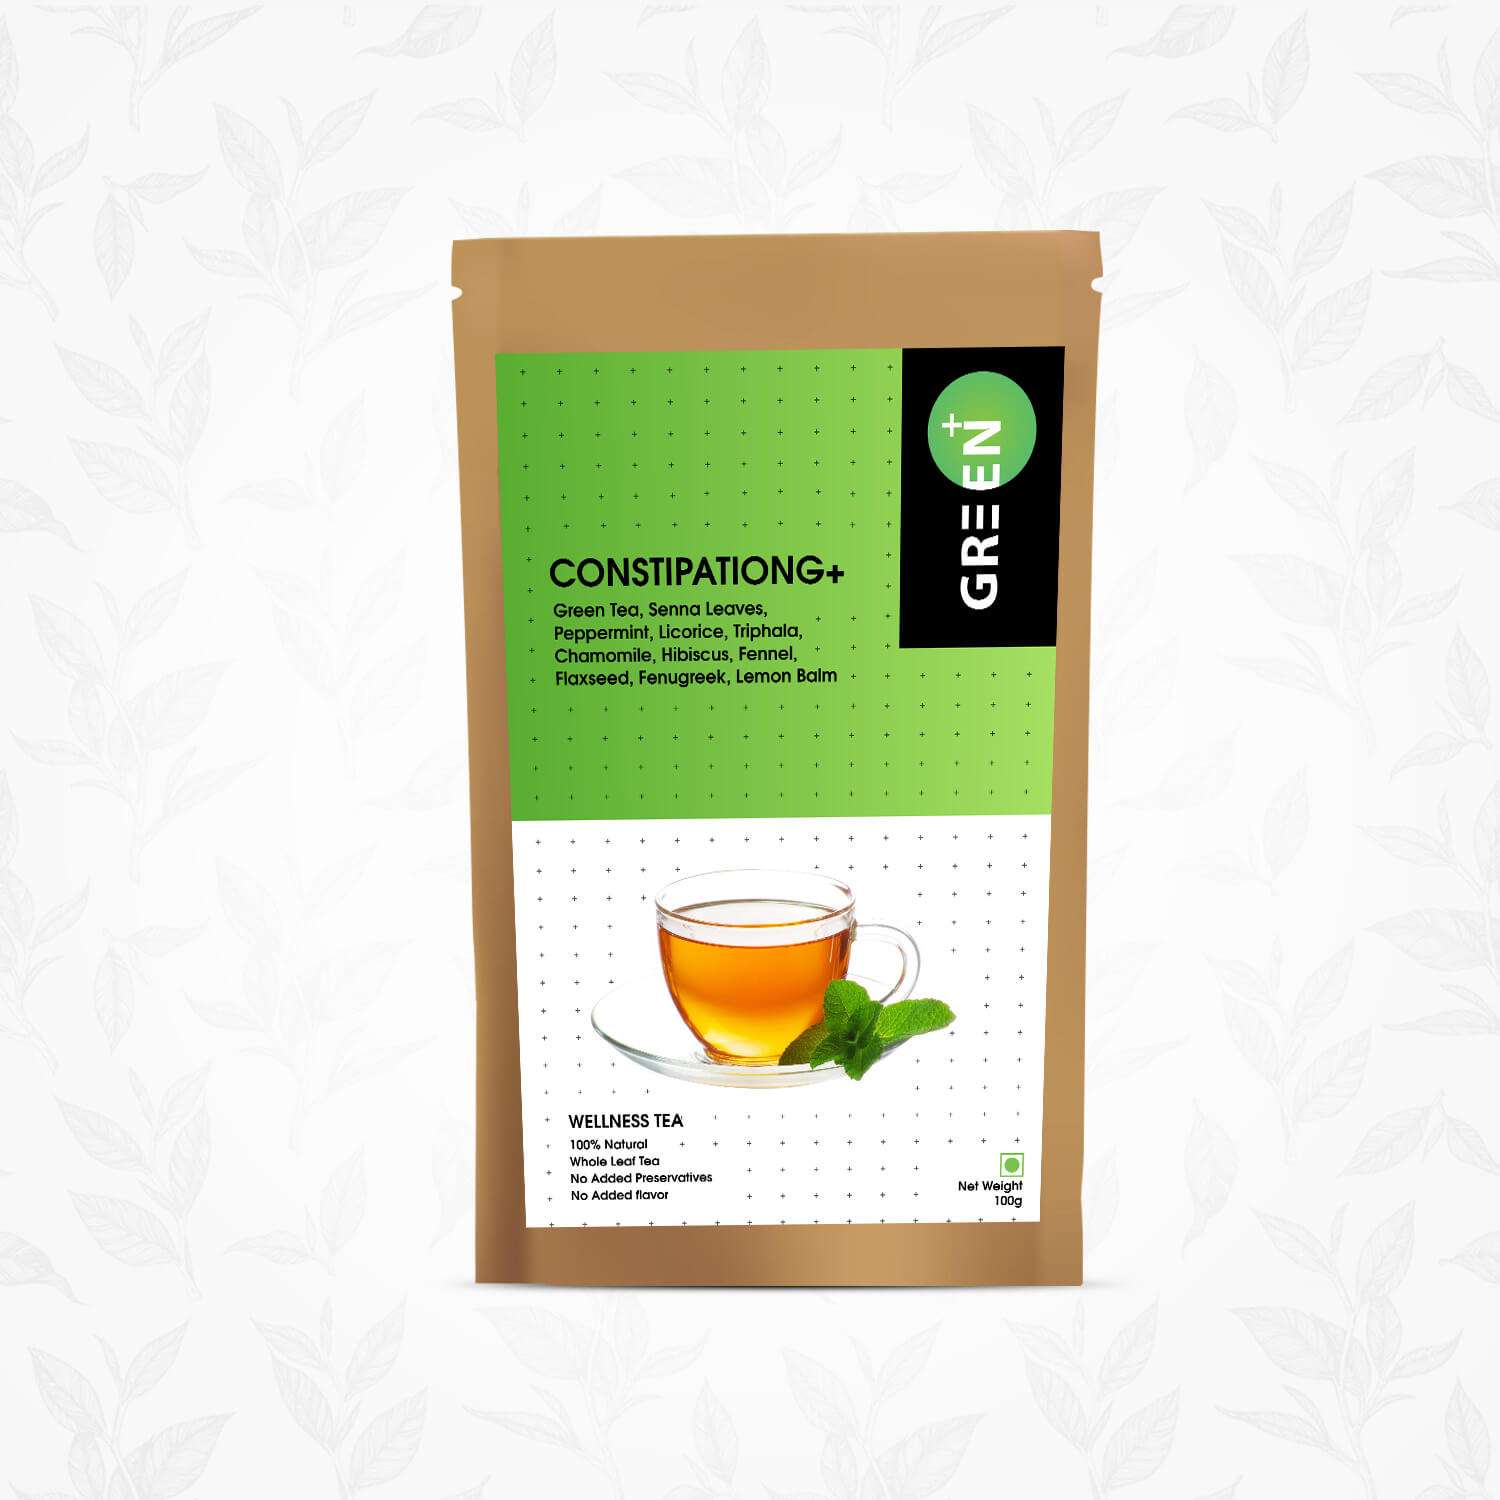 Green Tea and constipation